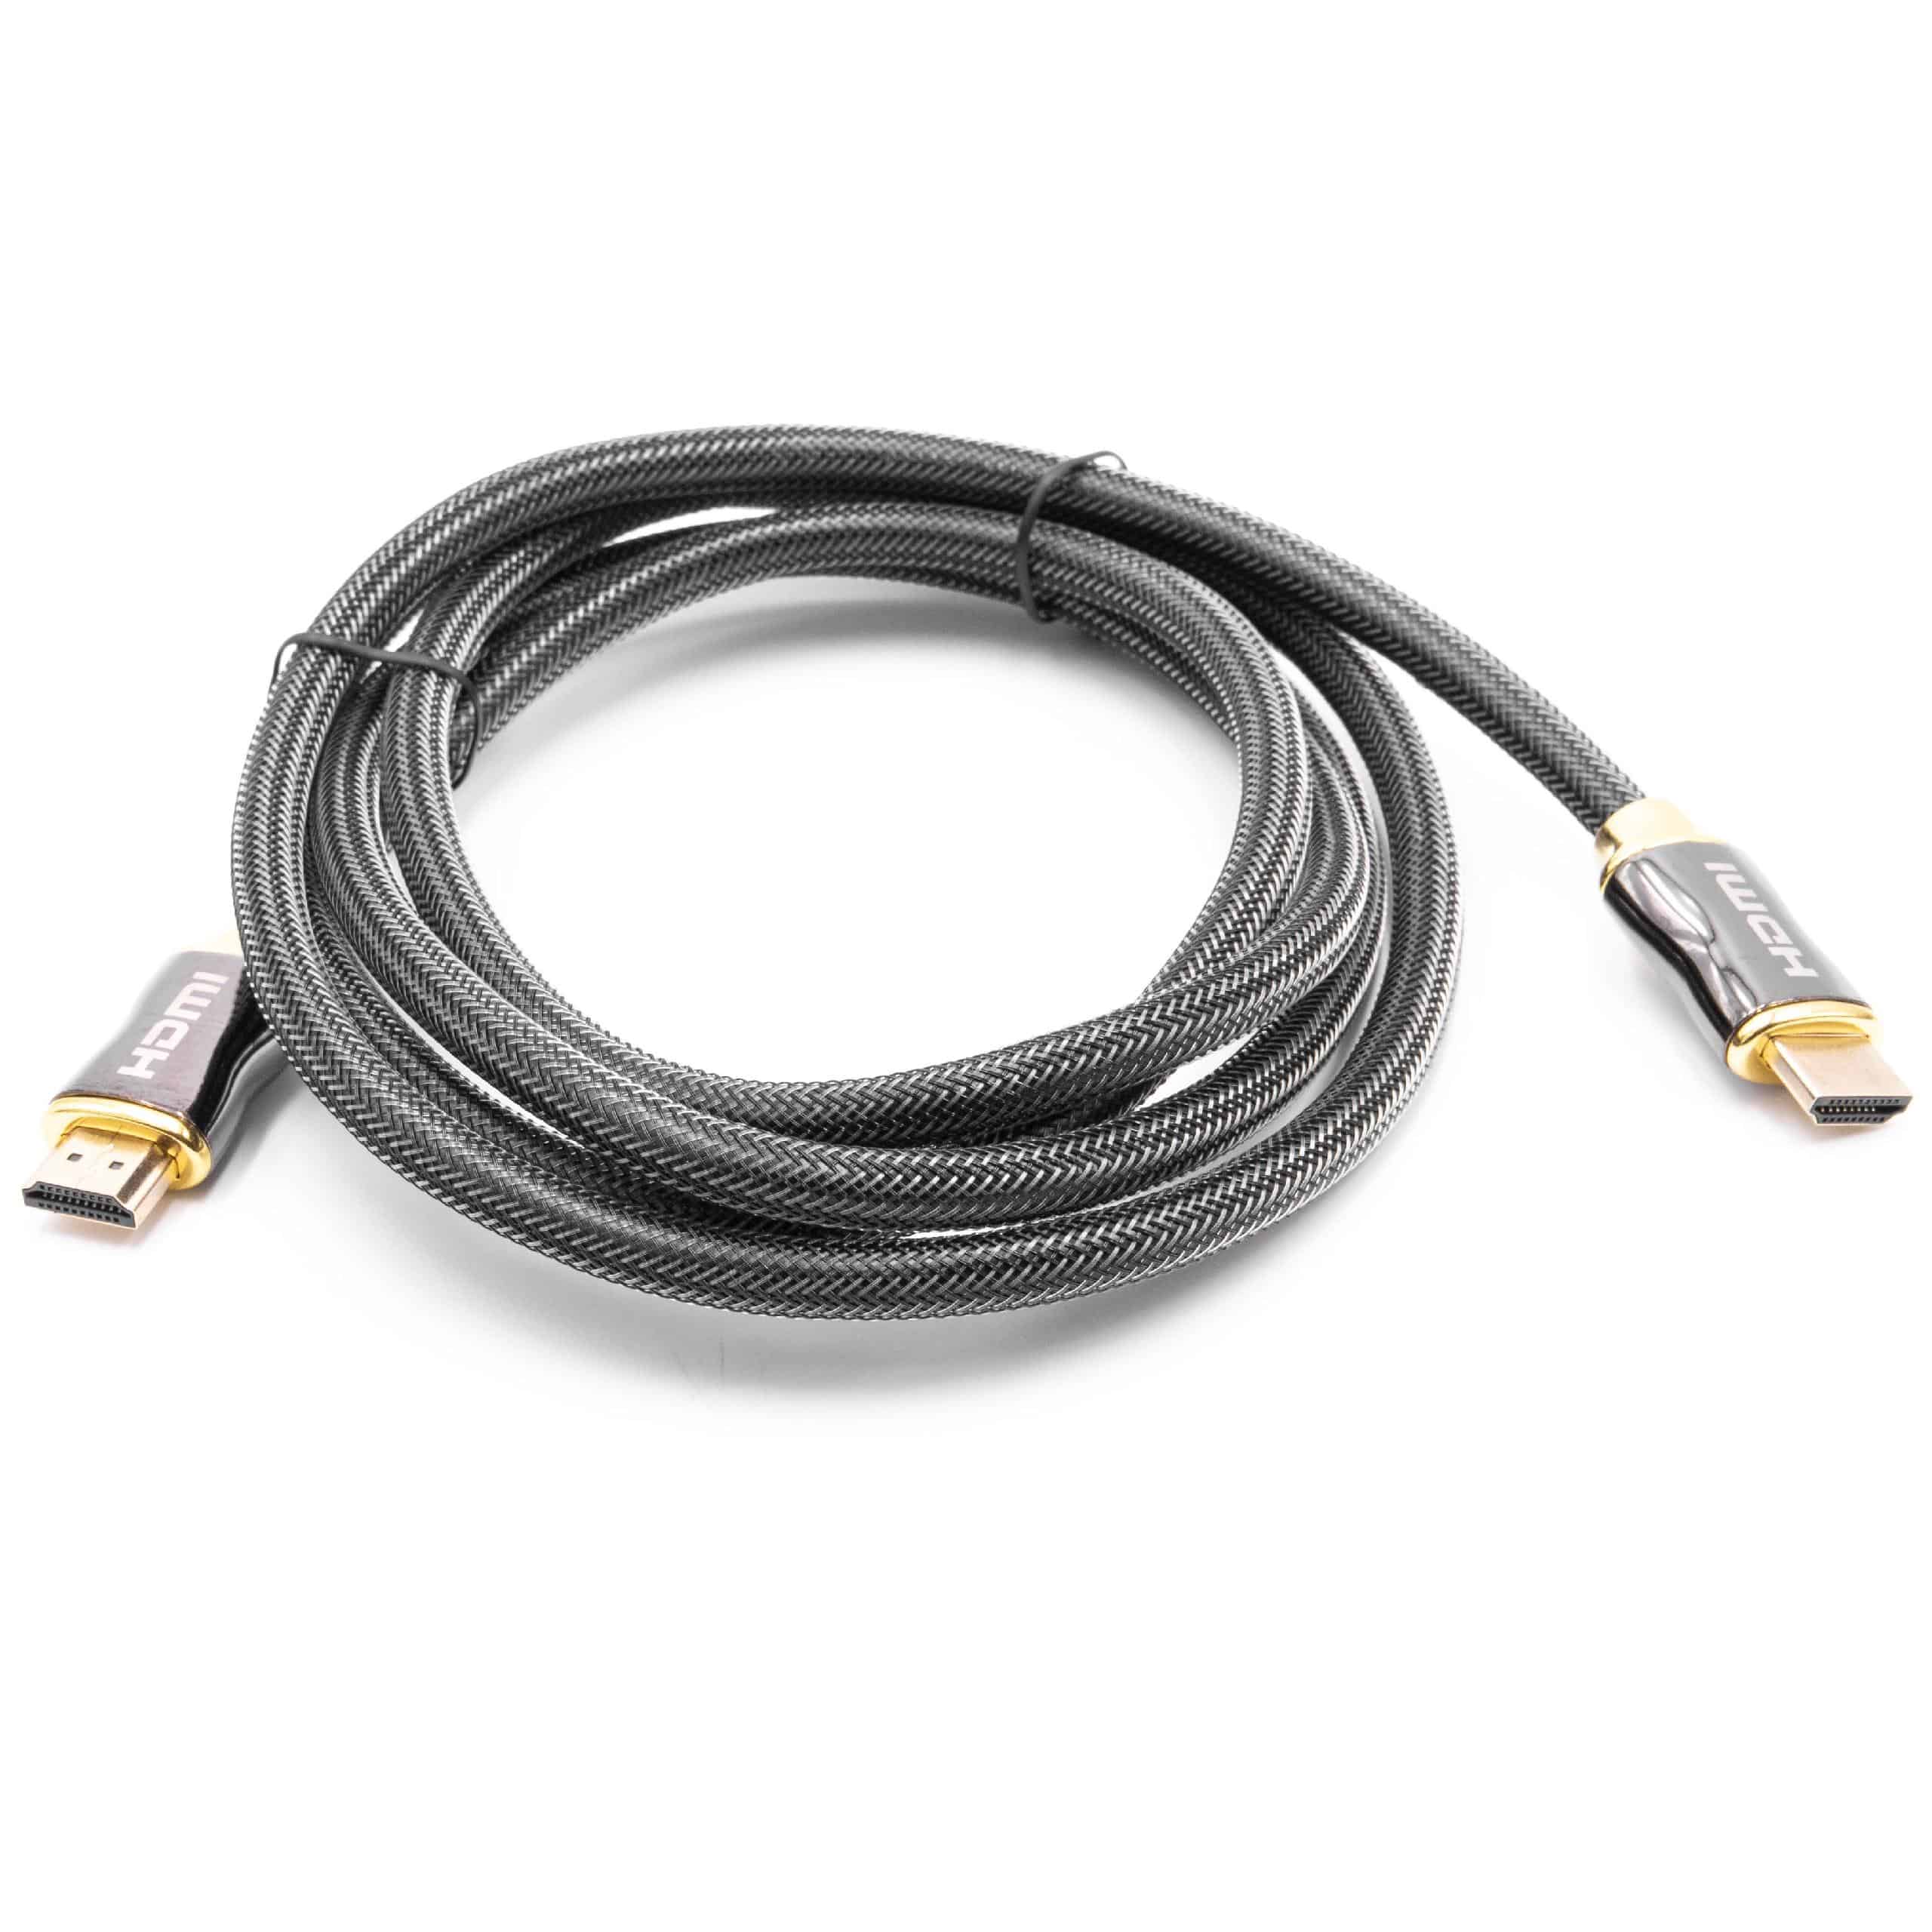 HDMI Cable Premium V2.0 Ultra HD TV braided 2mfor Tablet, TV, Television, Playstation, Computer, Monitor, DVD 